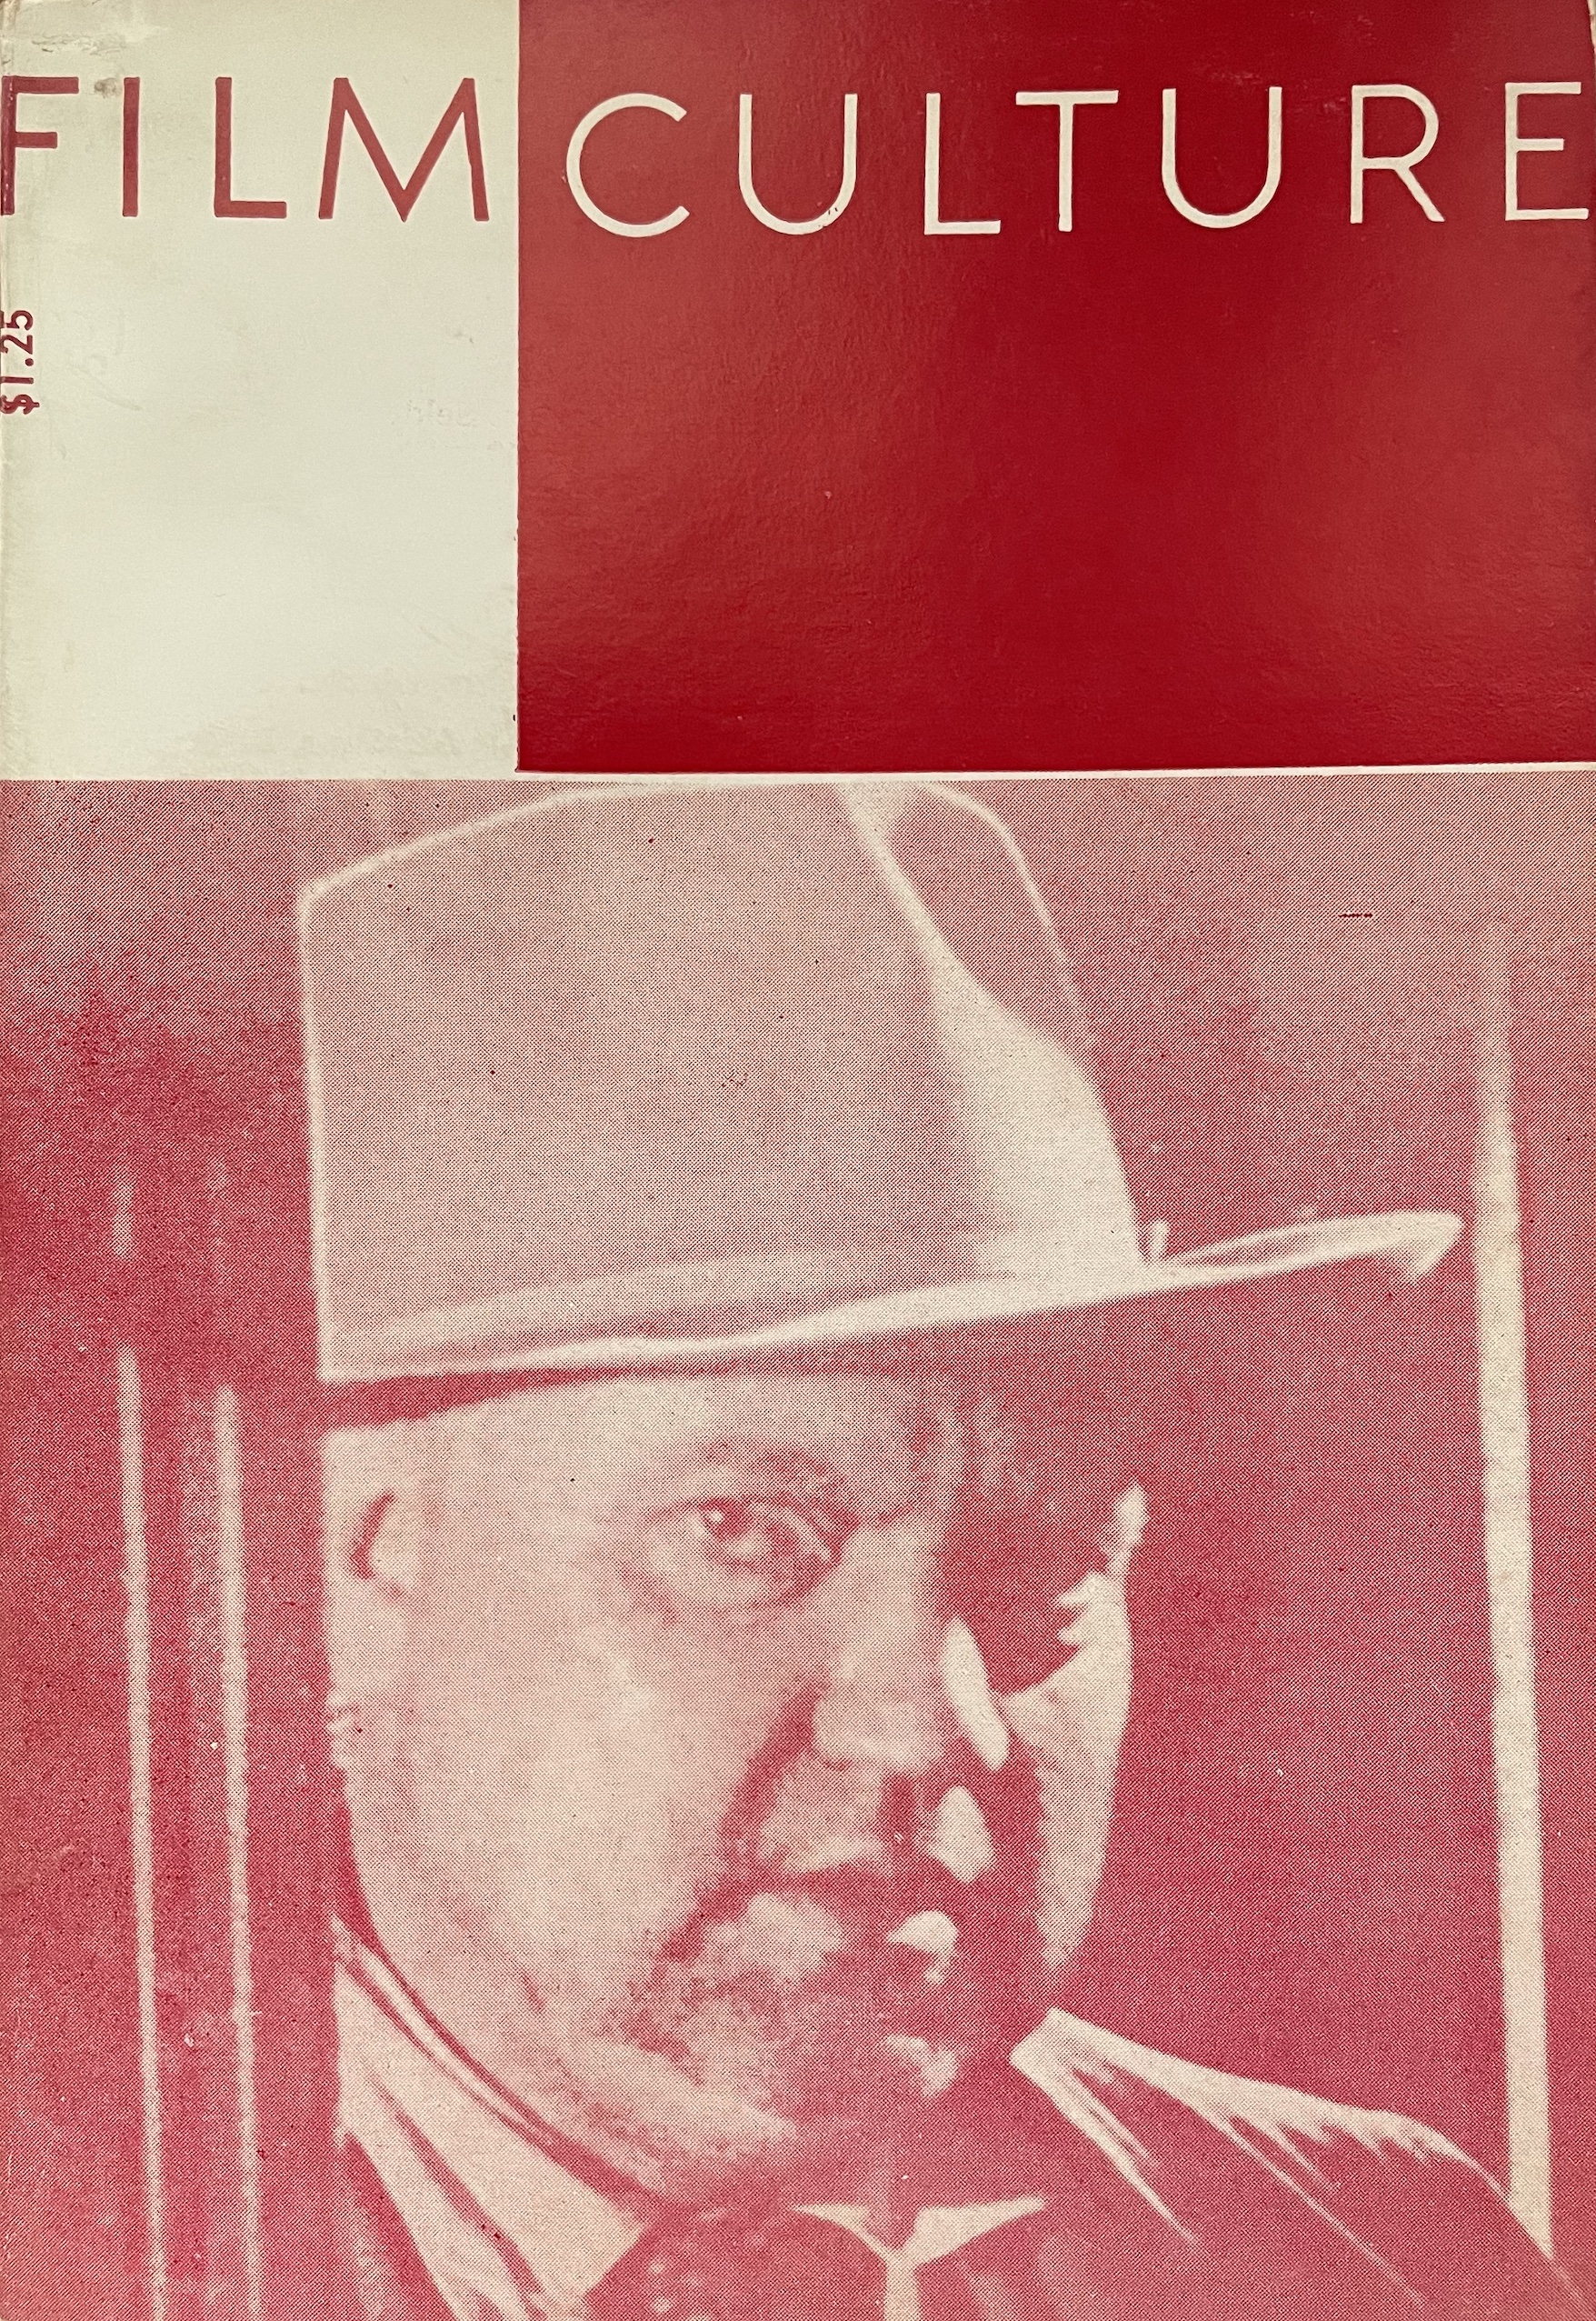 Cover to Film Culture 20 that has a photo of Orson Welles